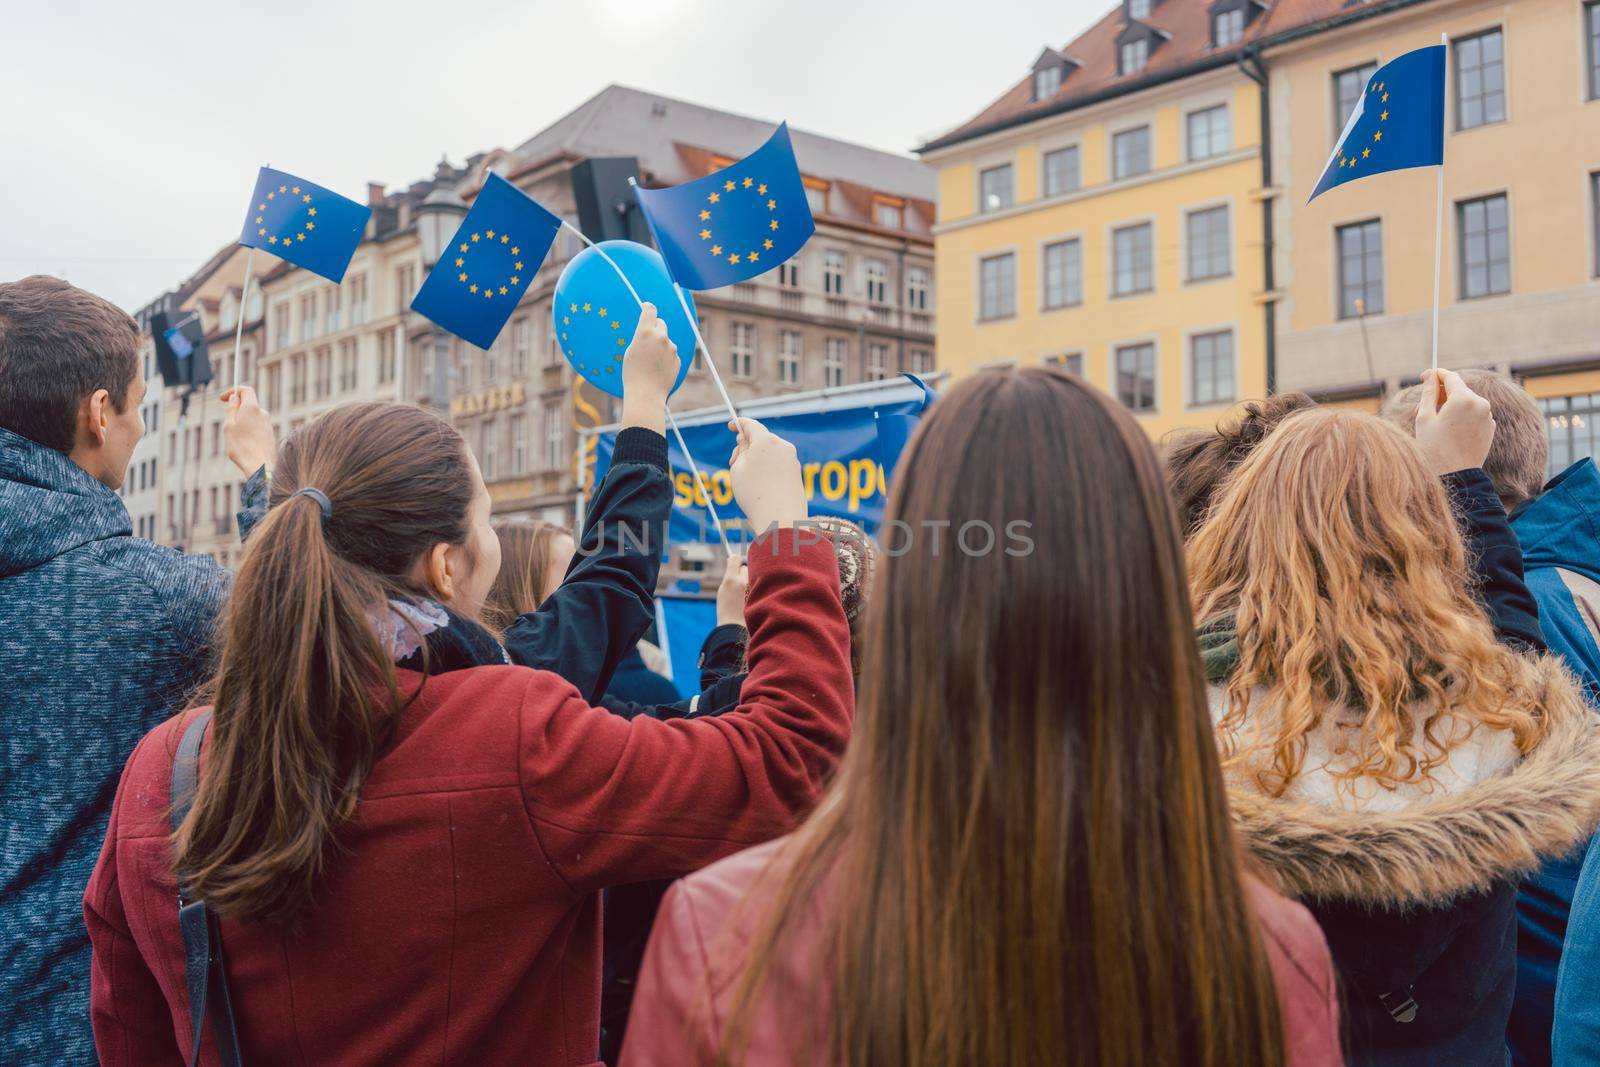 People on rally or demonstration supporting the EU waving flags